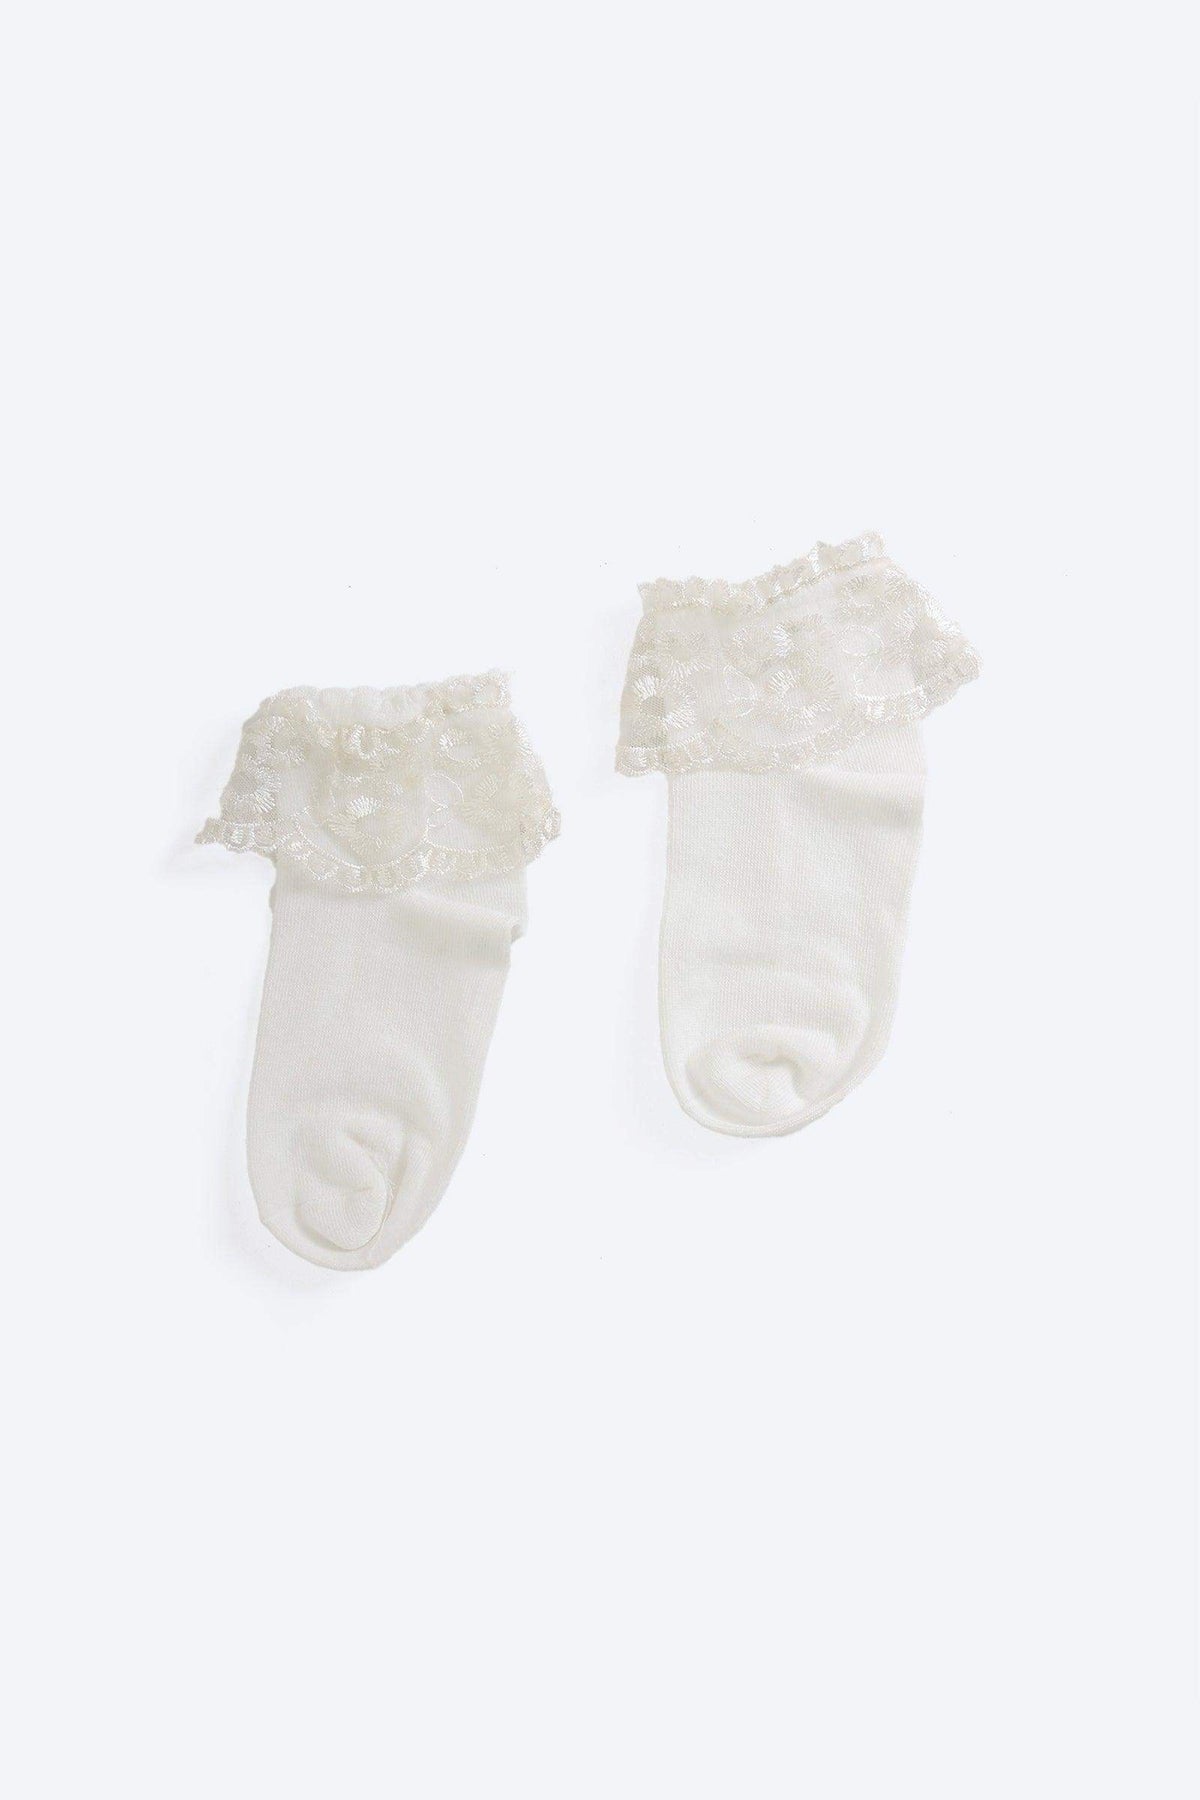 Girly Frilled Socks with Lace - Carina - كارينا